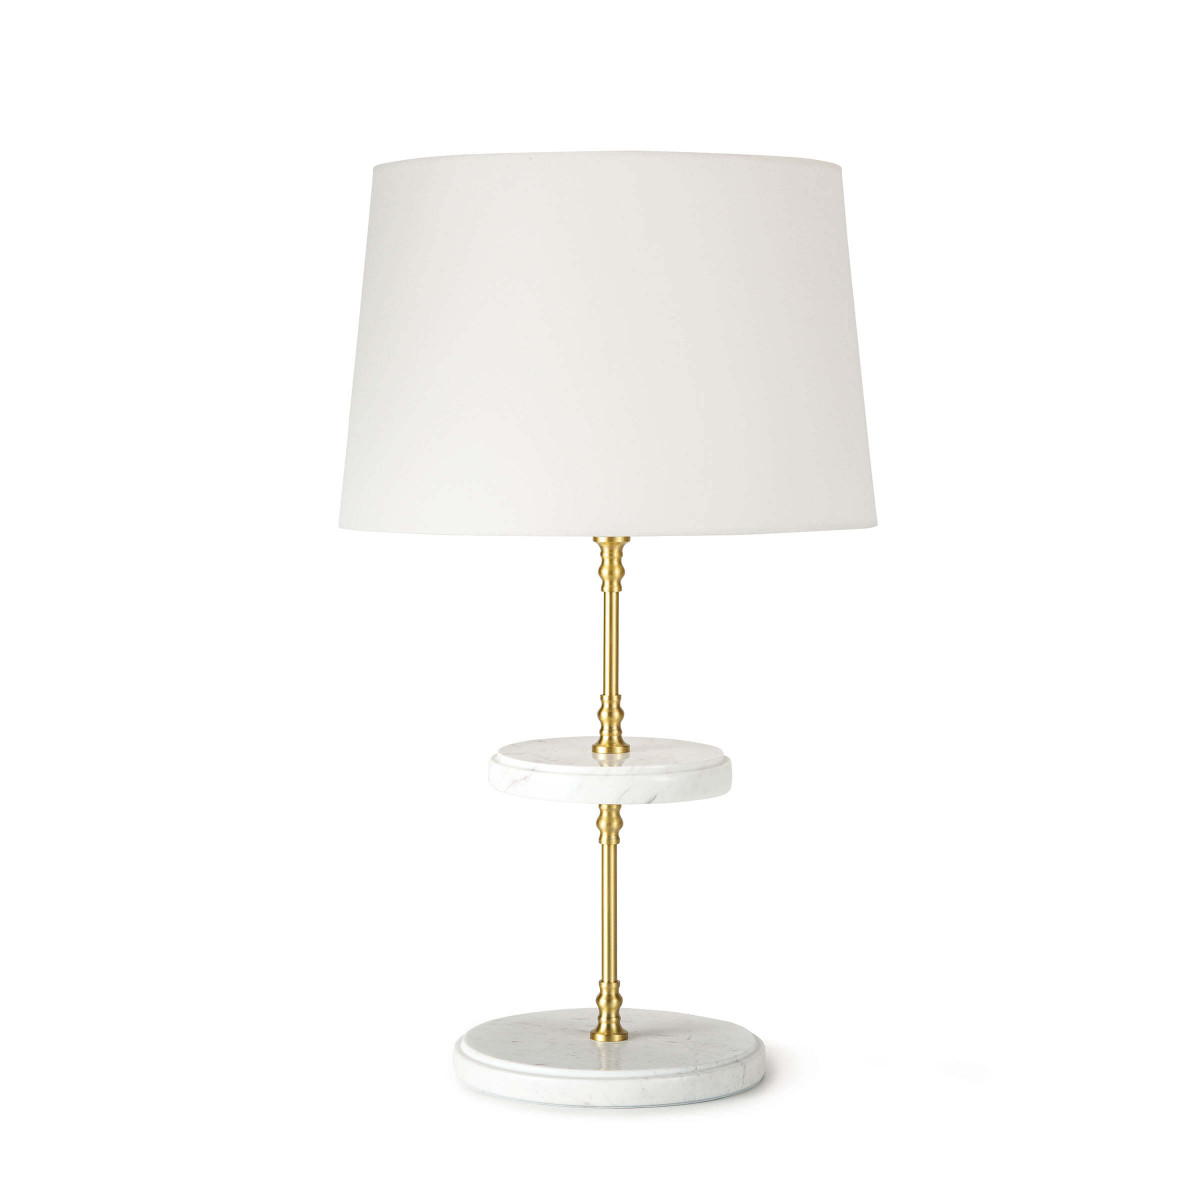 Cafe Table Lamp-$378.00